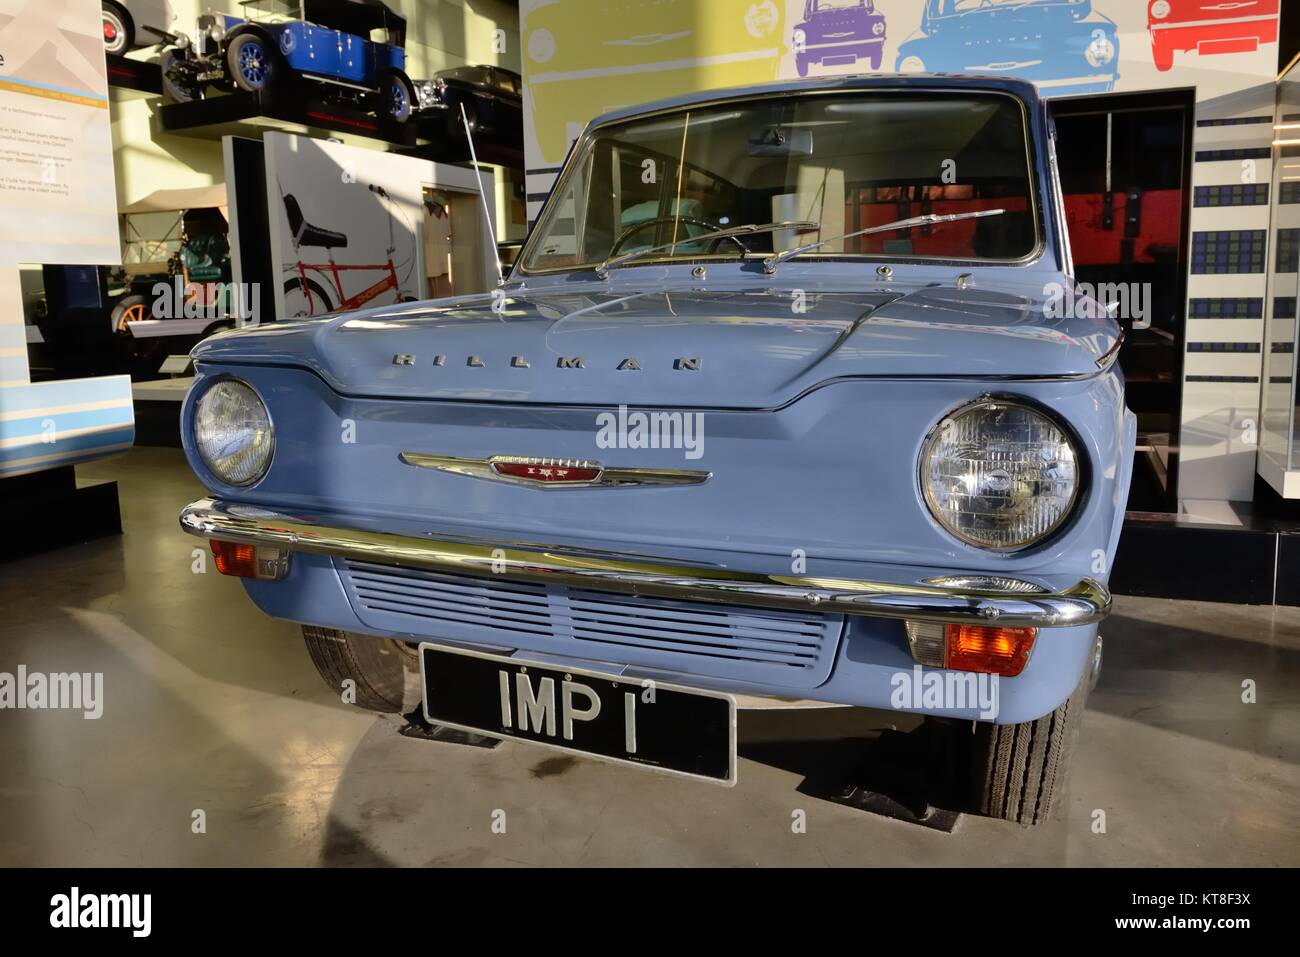 A classic Hillman Imp car on display at the Riverside museum of transport and travel in Glasgow, Scotland, UK Stock Photo